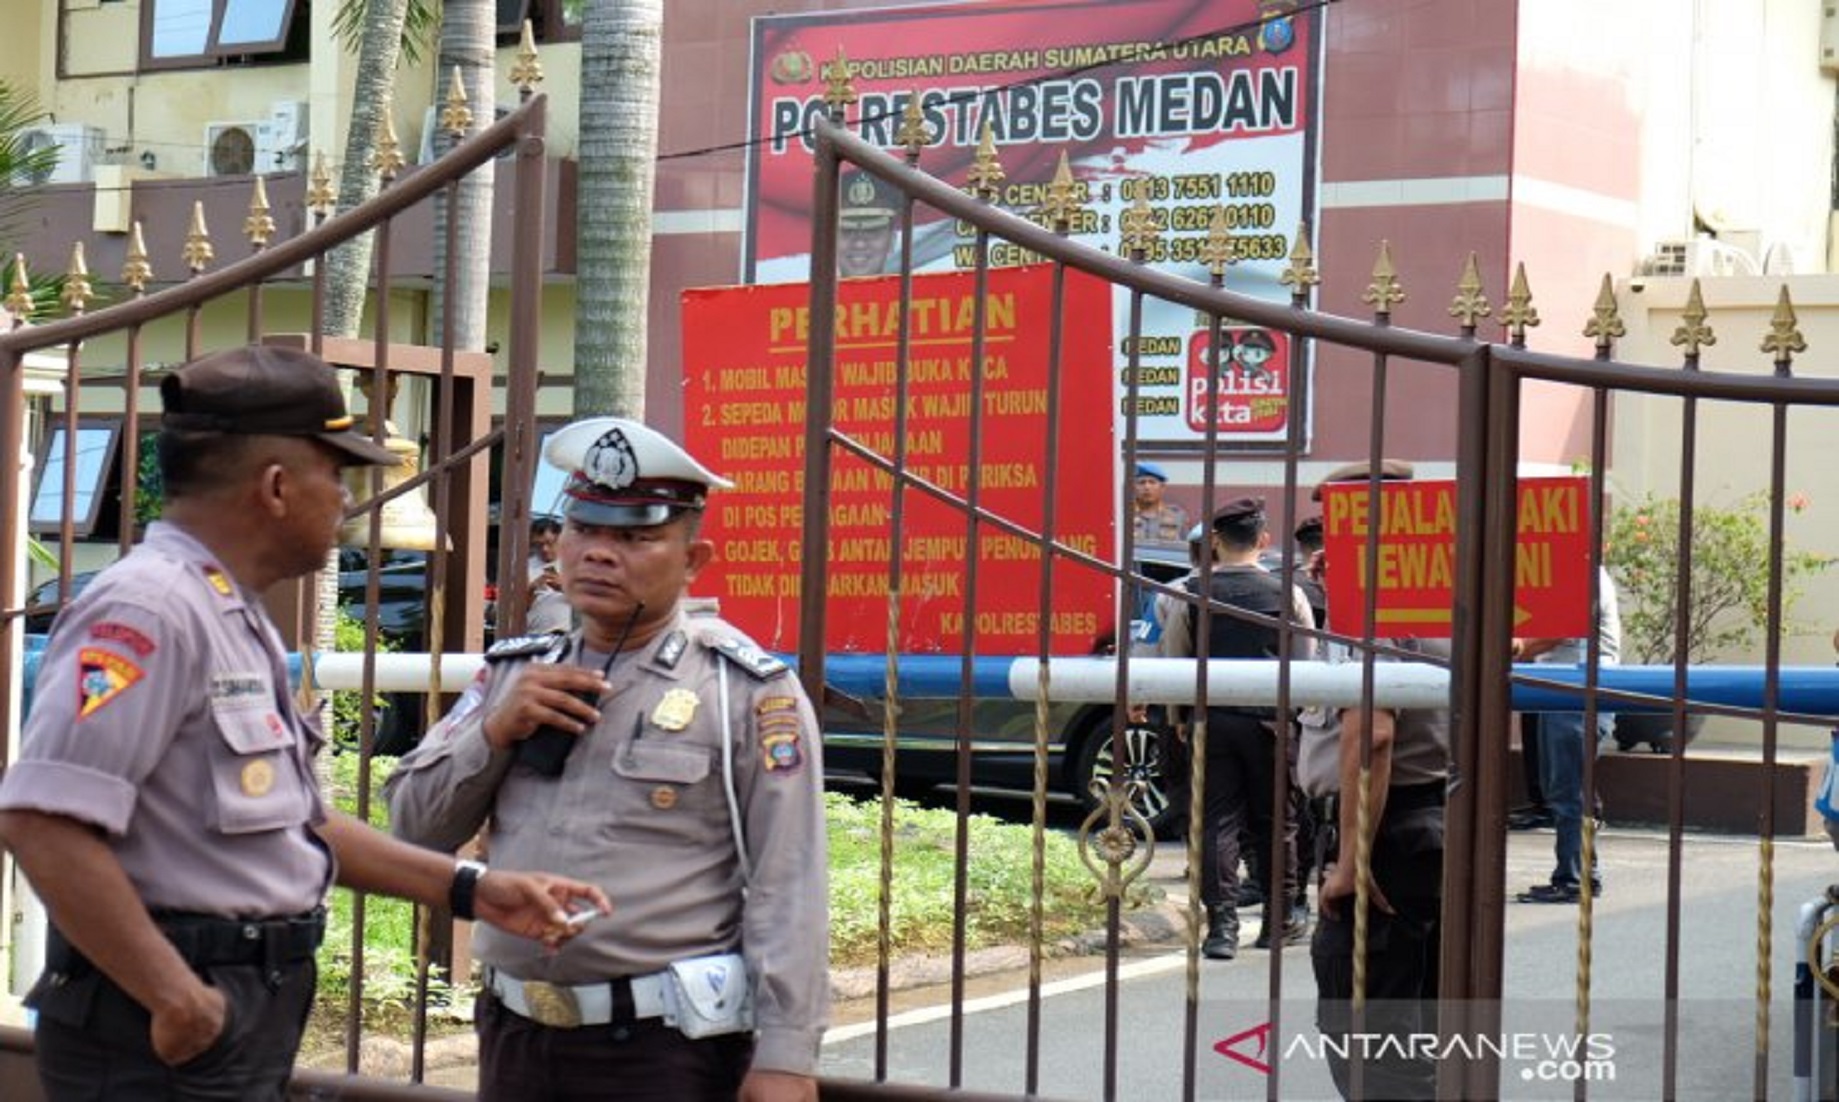 Updated: A Suspected Suicide Bomber Strikes Medan Police HQ In Indonesia